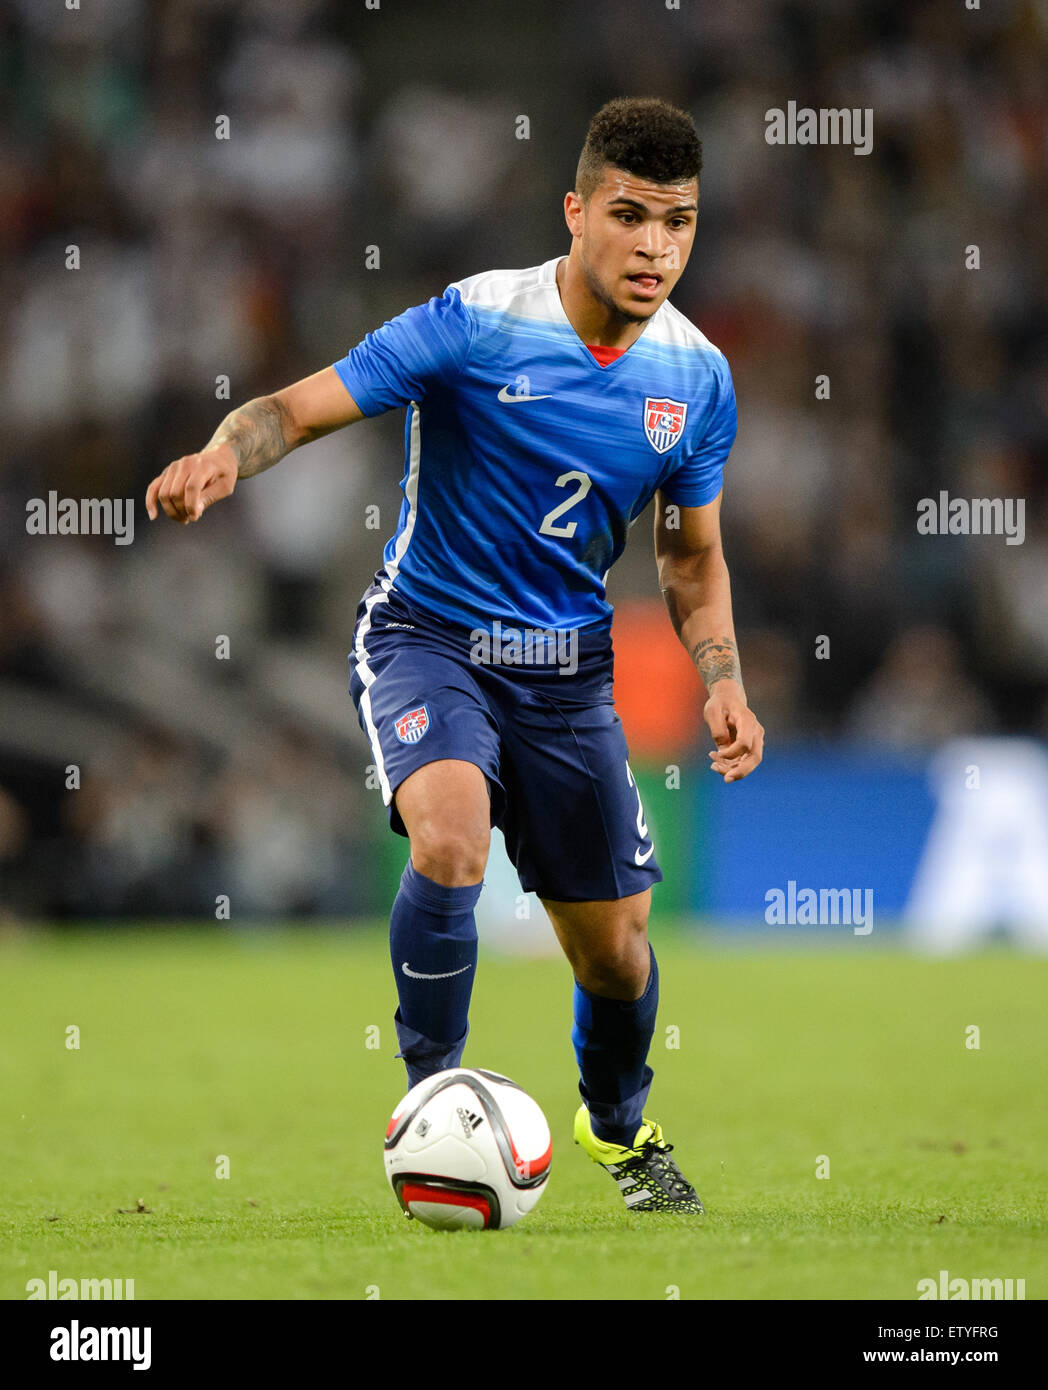 Cologne, Germany. 10th June, 2015. DeAndre Yedlin of the USA in action during the international friendly soccer match between Germany and the USA at RheinEnergieStadion in Cologne, Germany, 10 June 2015. The USA won the match 2-1. Photo: Thomas Eisenhuth/dpa - NO WIRE SERVICE -/dpa/Alamy Live News Stock Photo